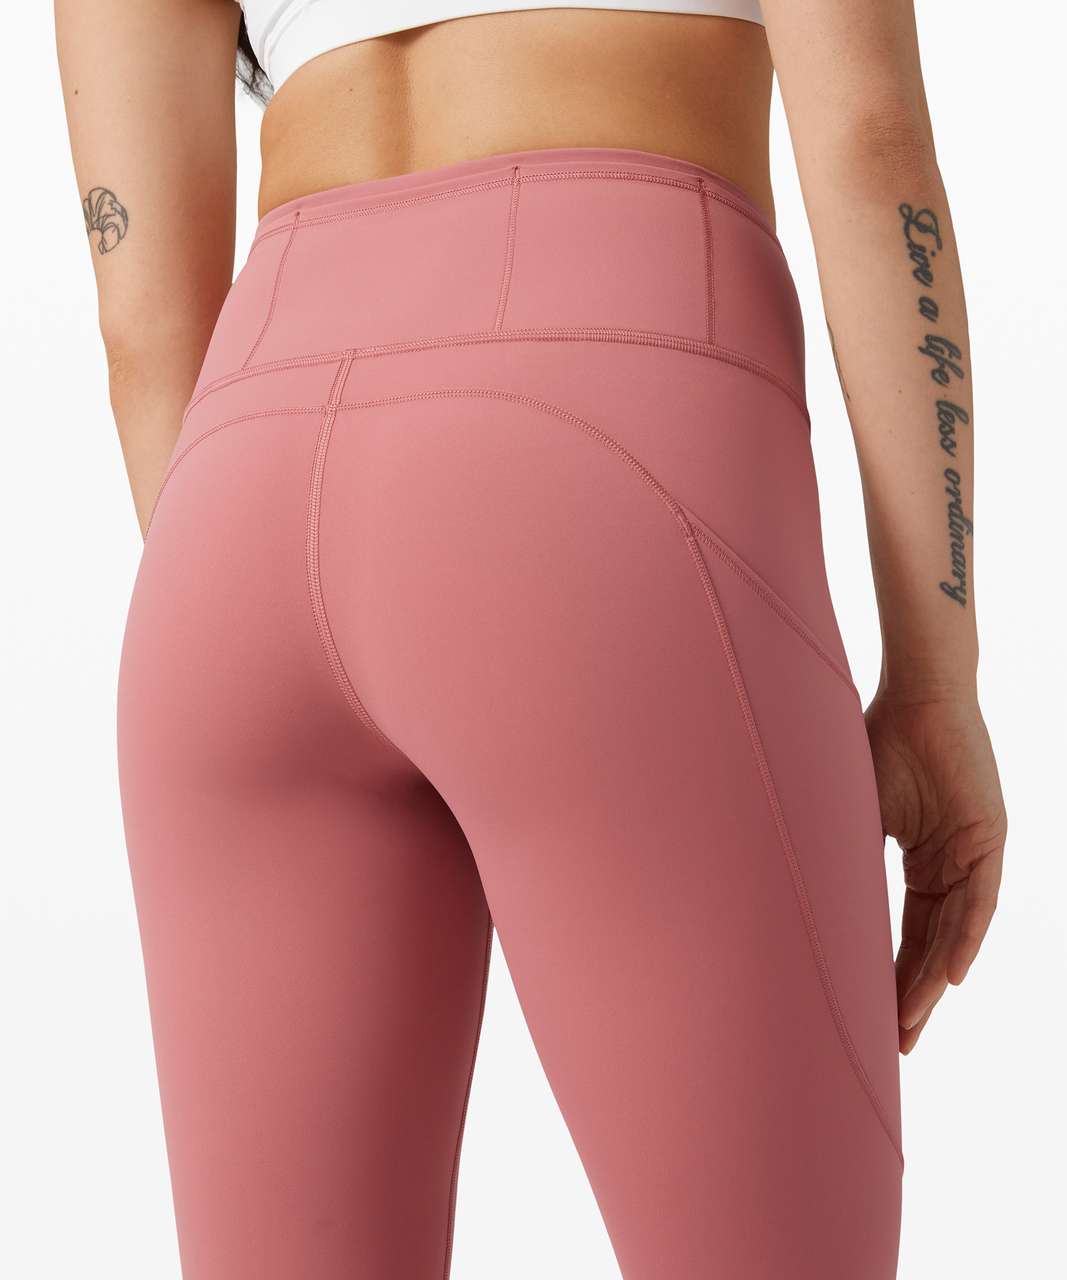 Lululemon Fast and Free Tight 31" *Non-Reflective - Cherry Tint